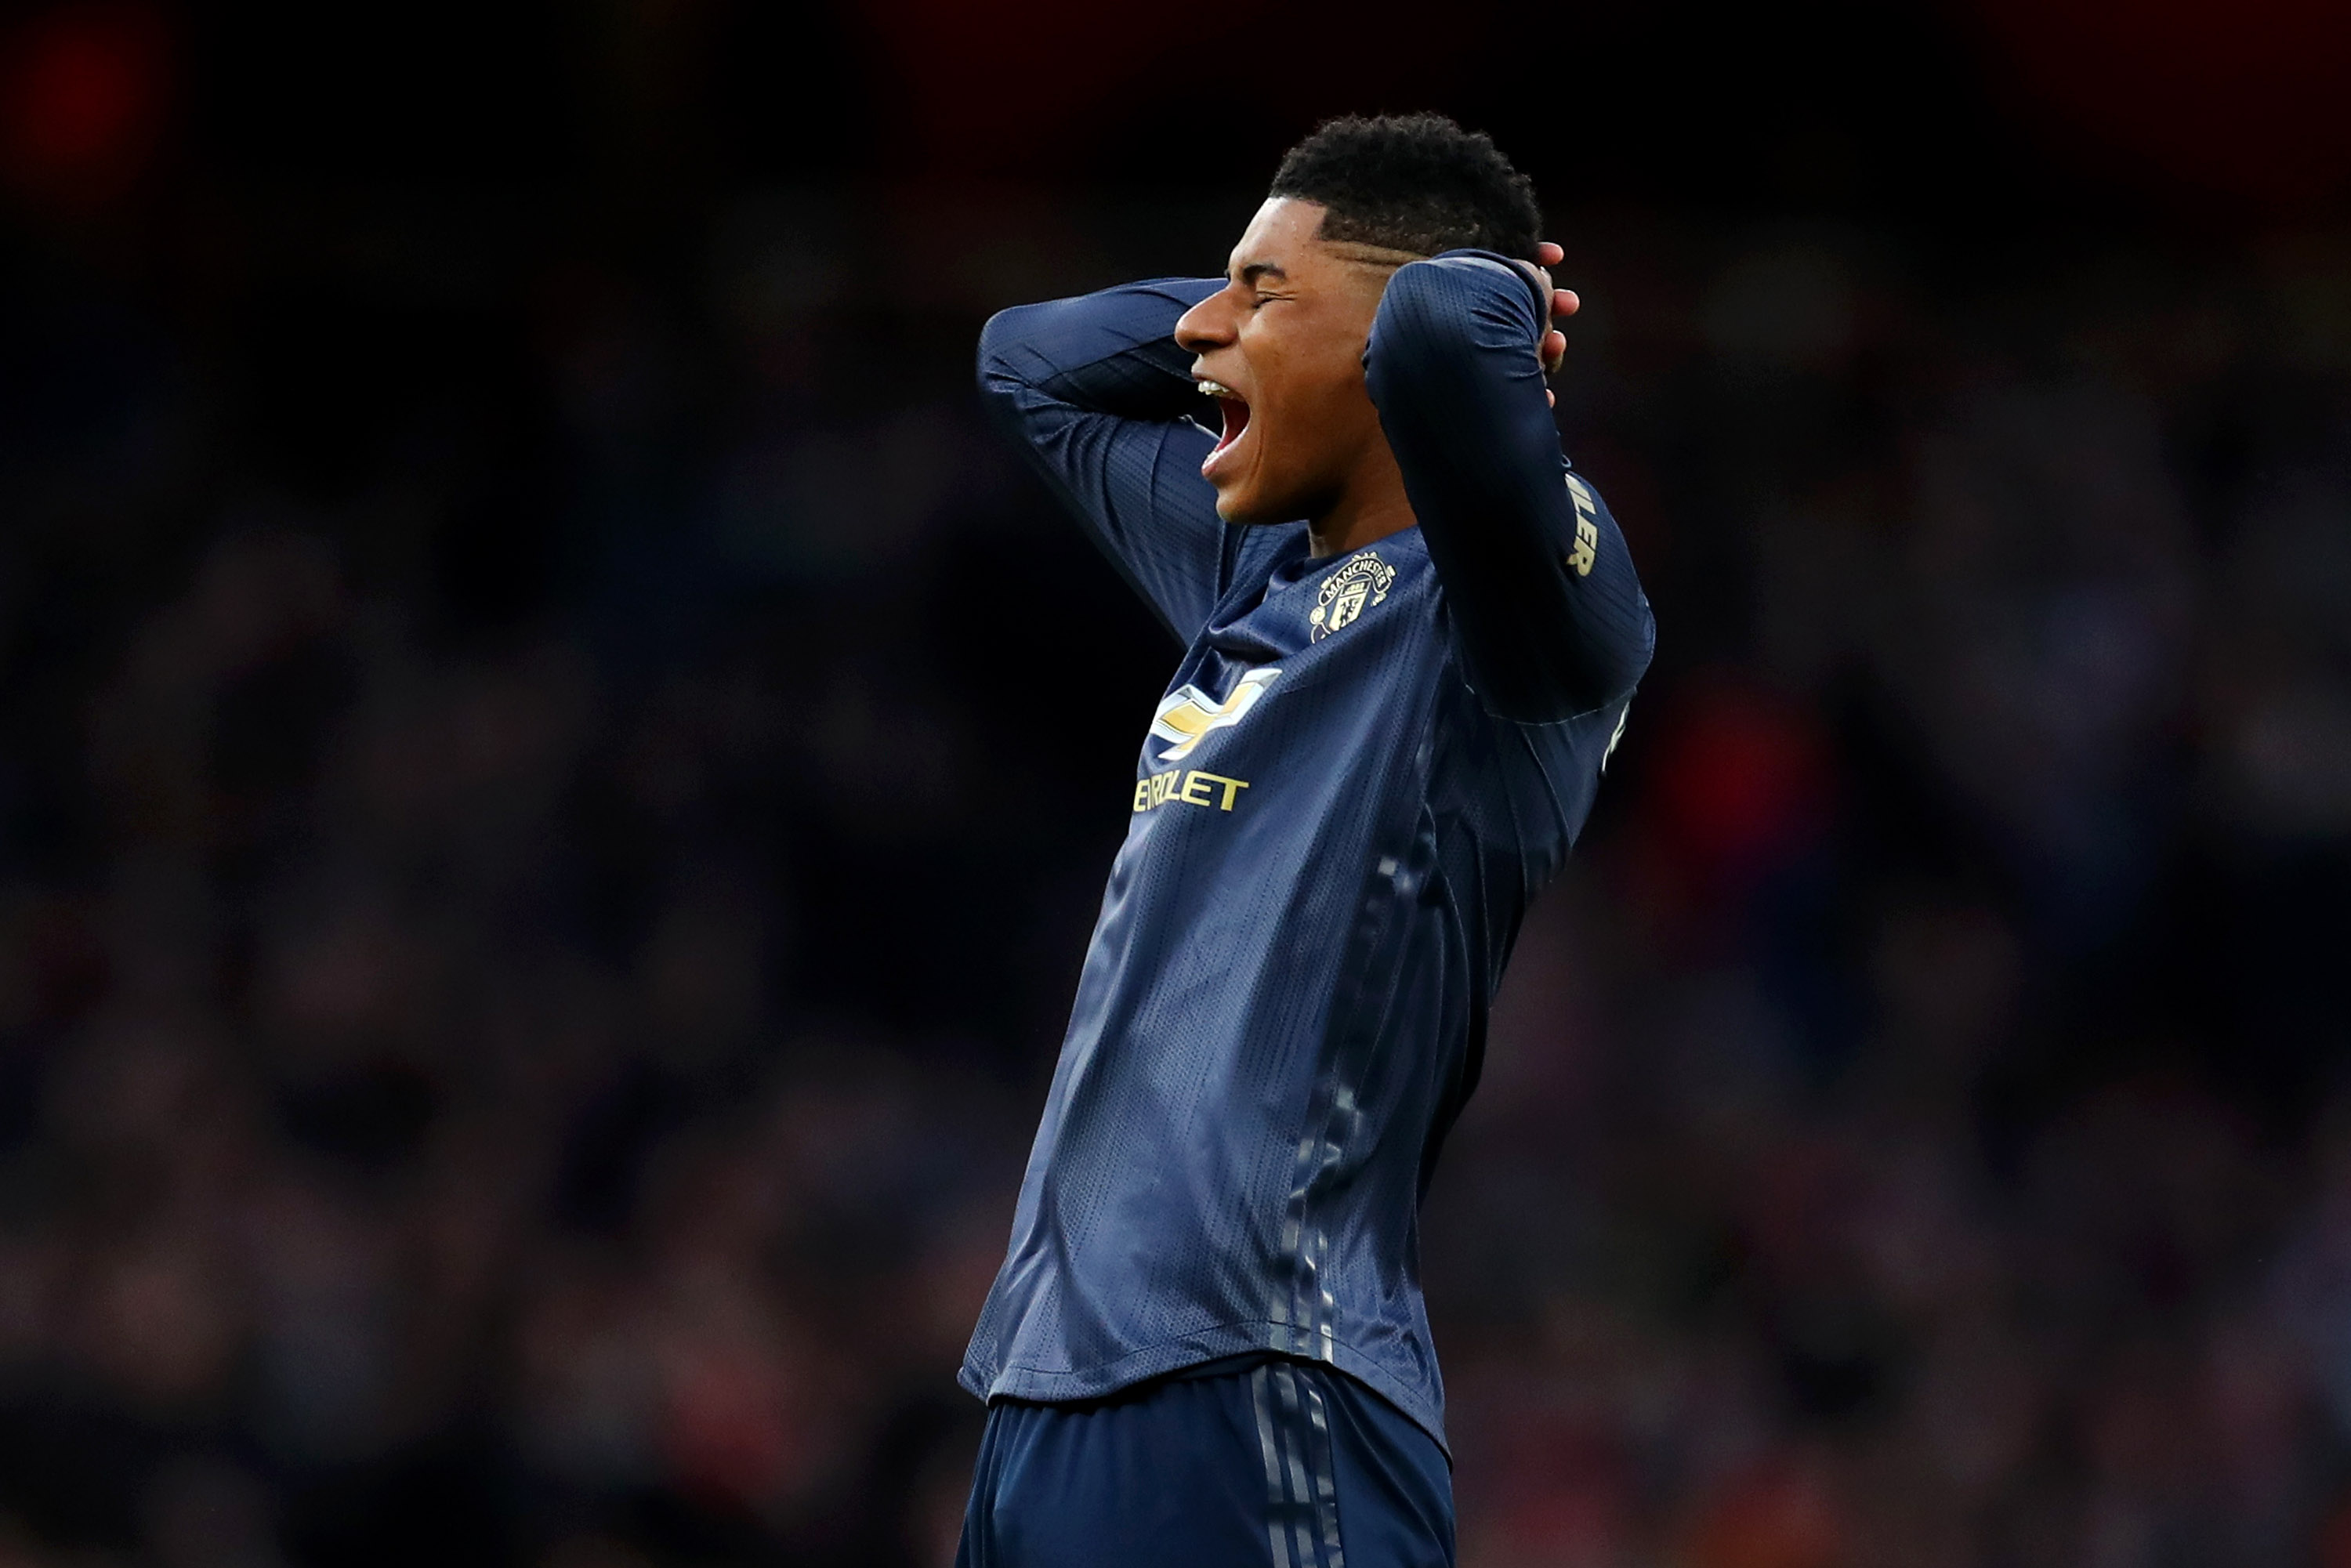 LONDON, ENGLAND - MARCH 10: Marcus Rashford of Manchester United reacts after missing a freekick during the Premier League match between Arsenal FC and Manchester United at Emirates Stadium on March 10, 2019 in London, United Kingdom. (Photo by Catherine Ivill/Getty Images)